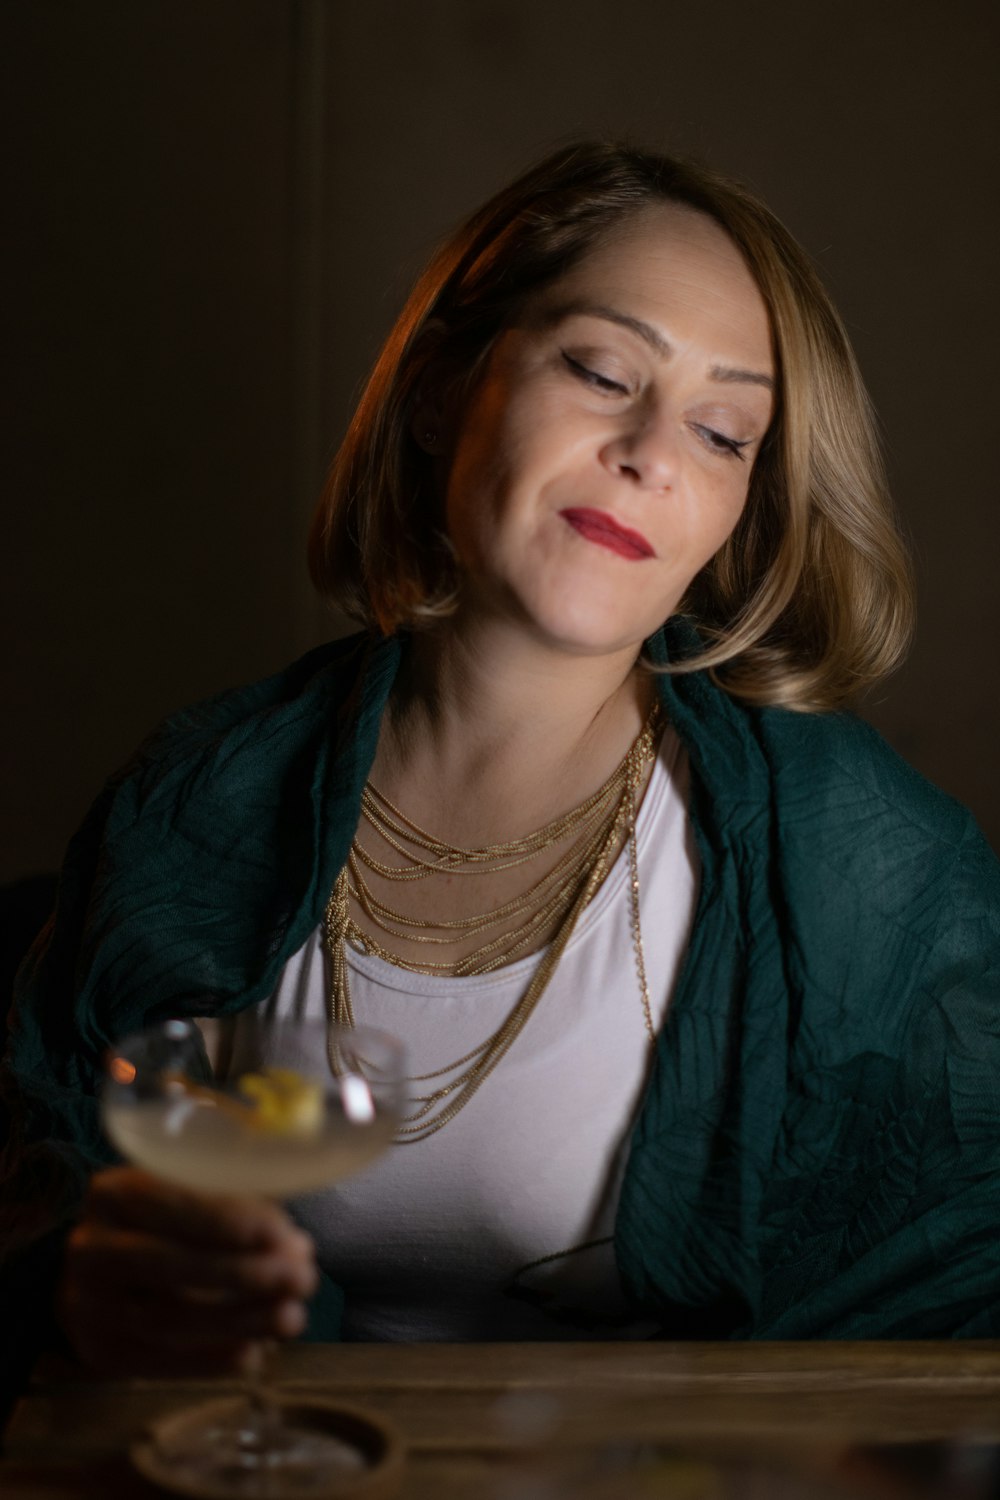 a woman sitting at a table holding a wine glass